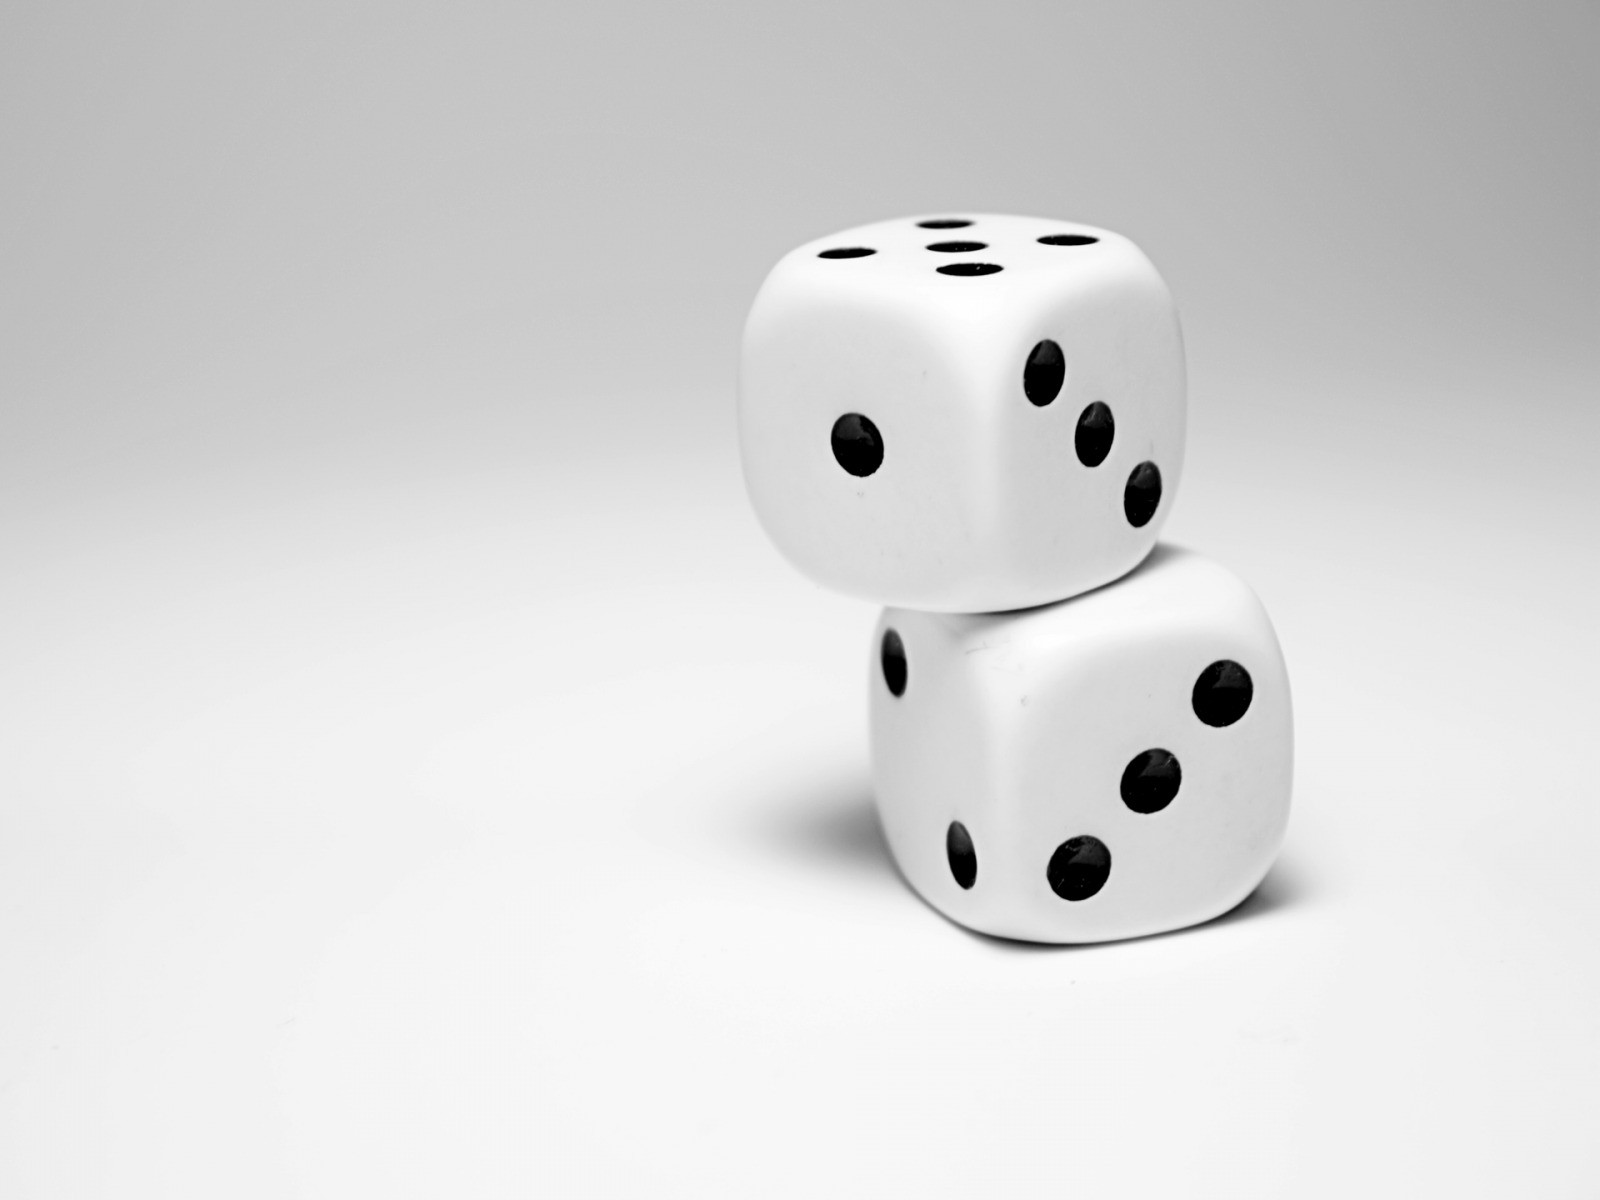 dice wallpaper,games,dice game,indoor games and sports,dice,recreation